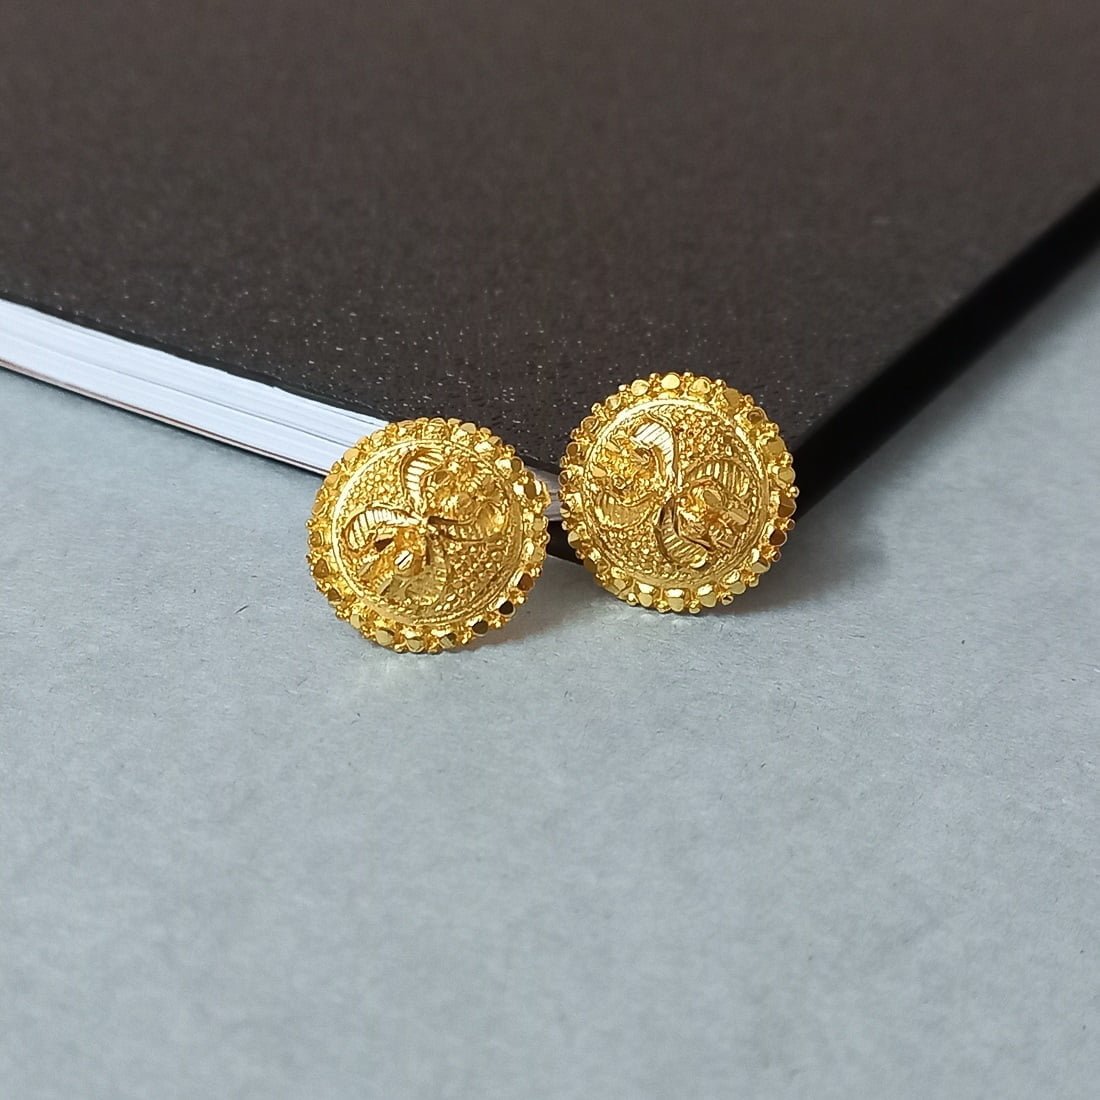 Balinese Traditional Stud Earrings White Pearl 925 Sterling Silver Gold  Plated | eBay